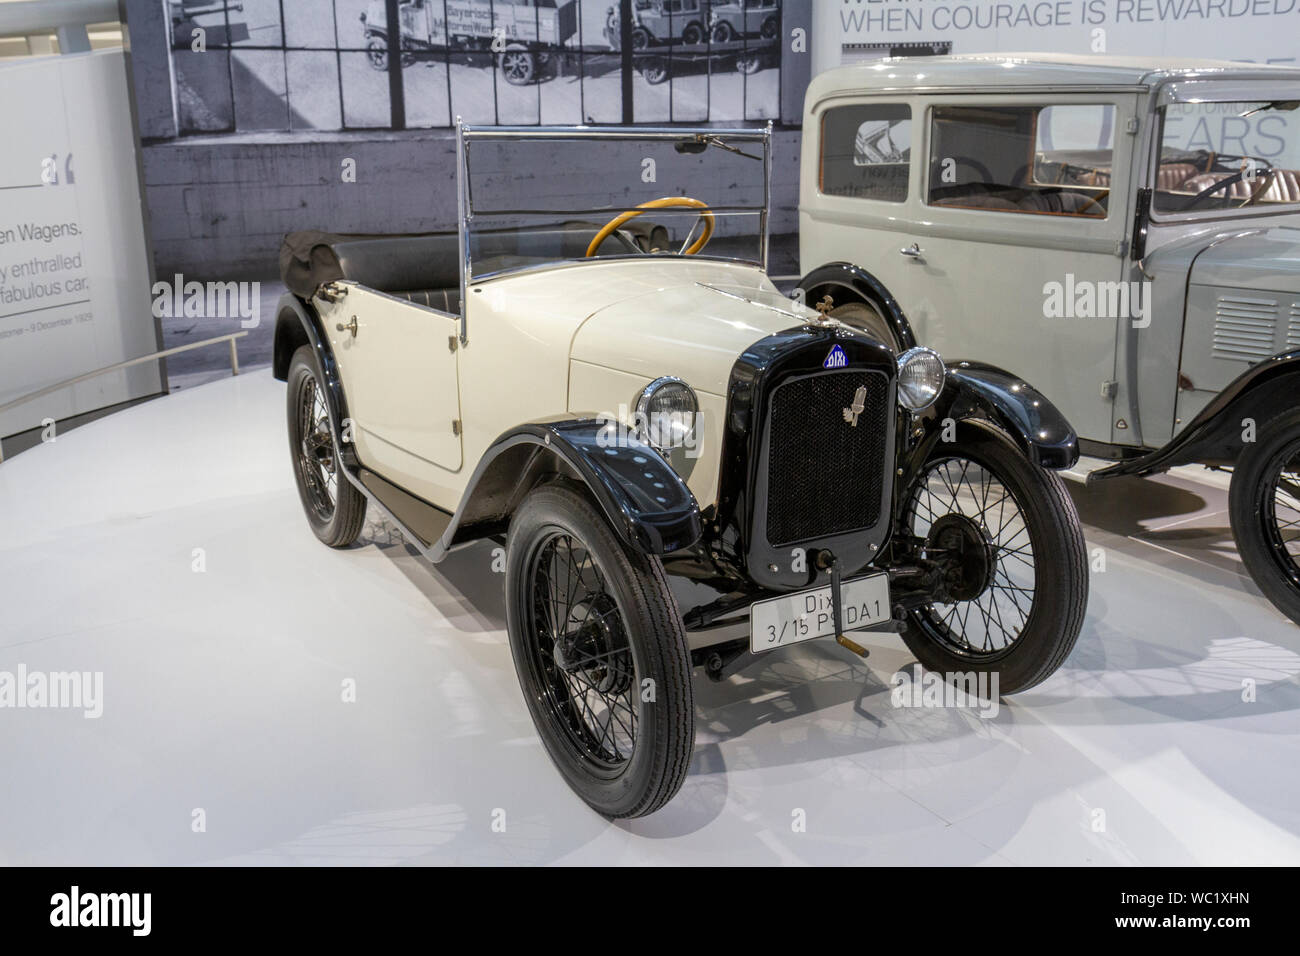 A BMW Dixi 3/15 PS DA 1 (1928), part of the 90 Years of BMW Automobiles display, BMW Museum, Munich, Bavaria, Germany. Stock Photo